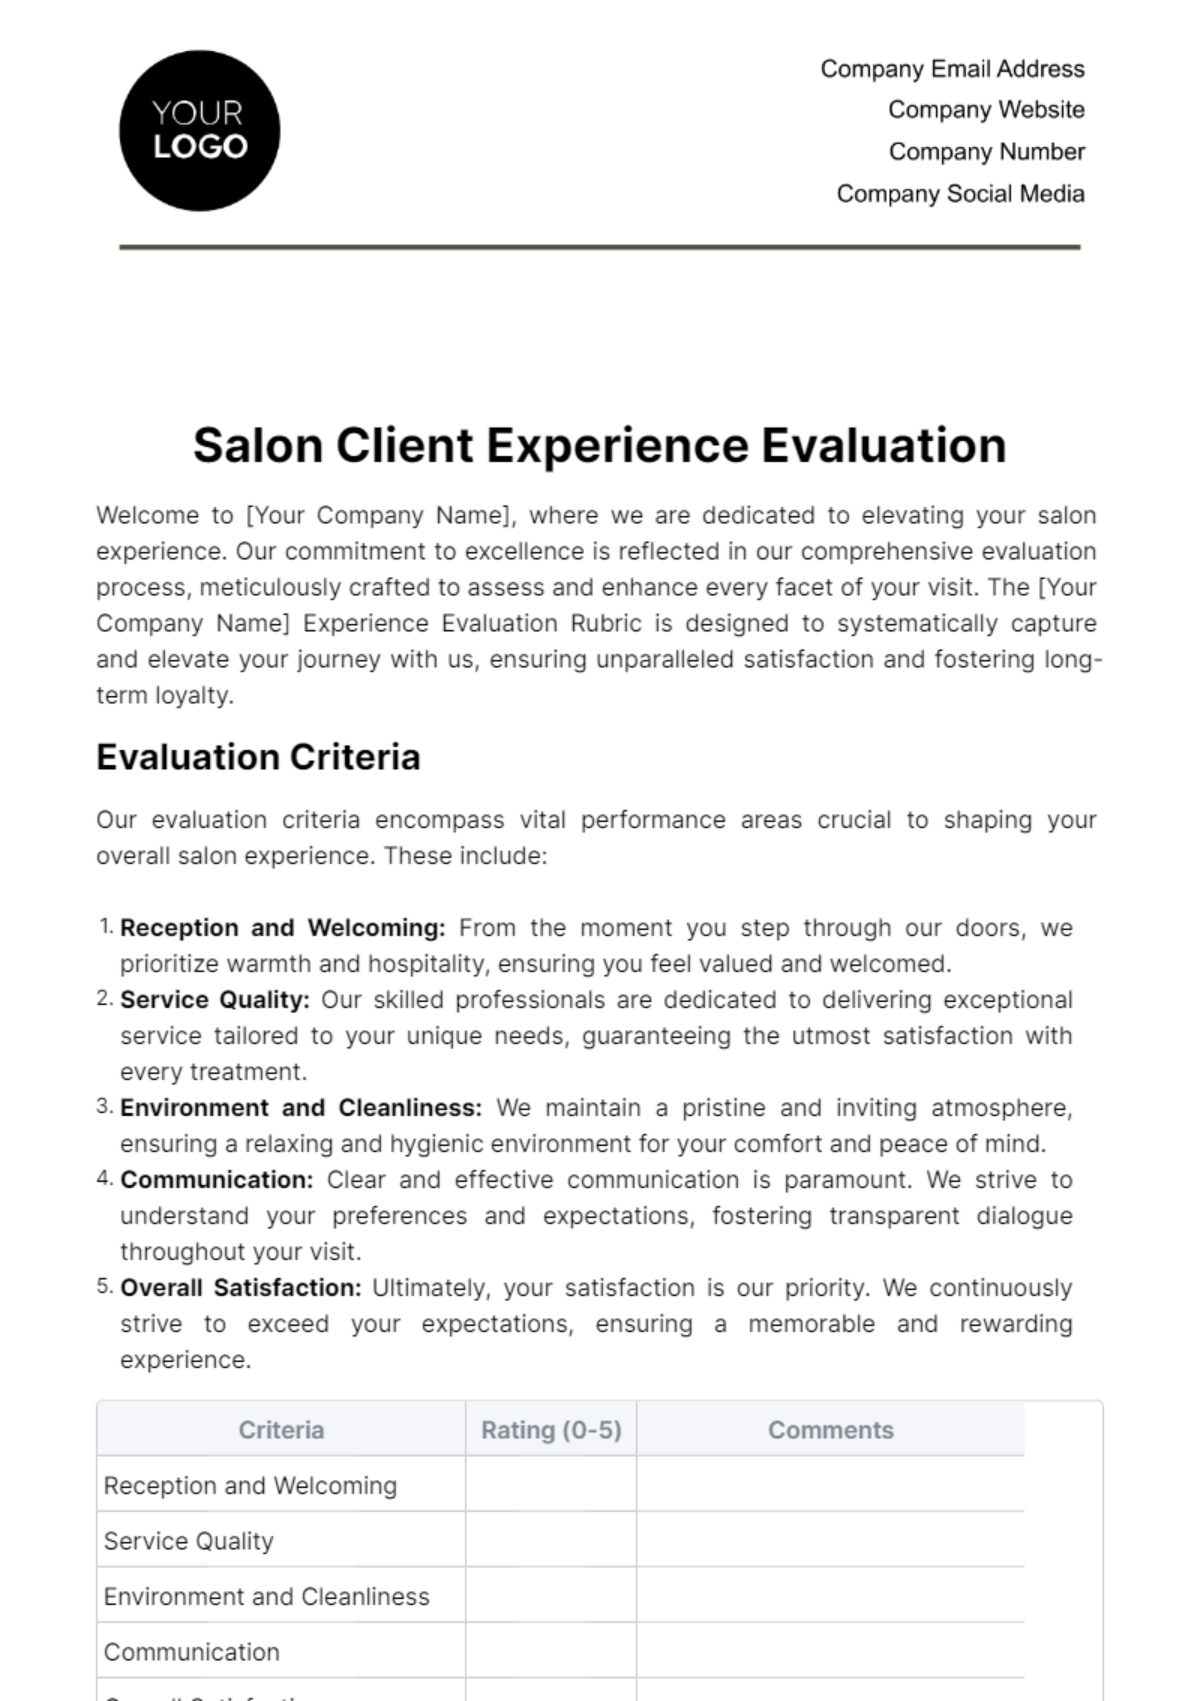 Free Salon Client Experience Evaluation Template